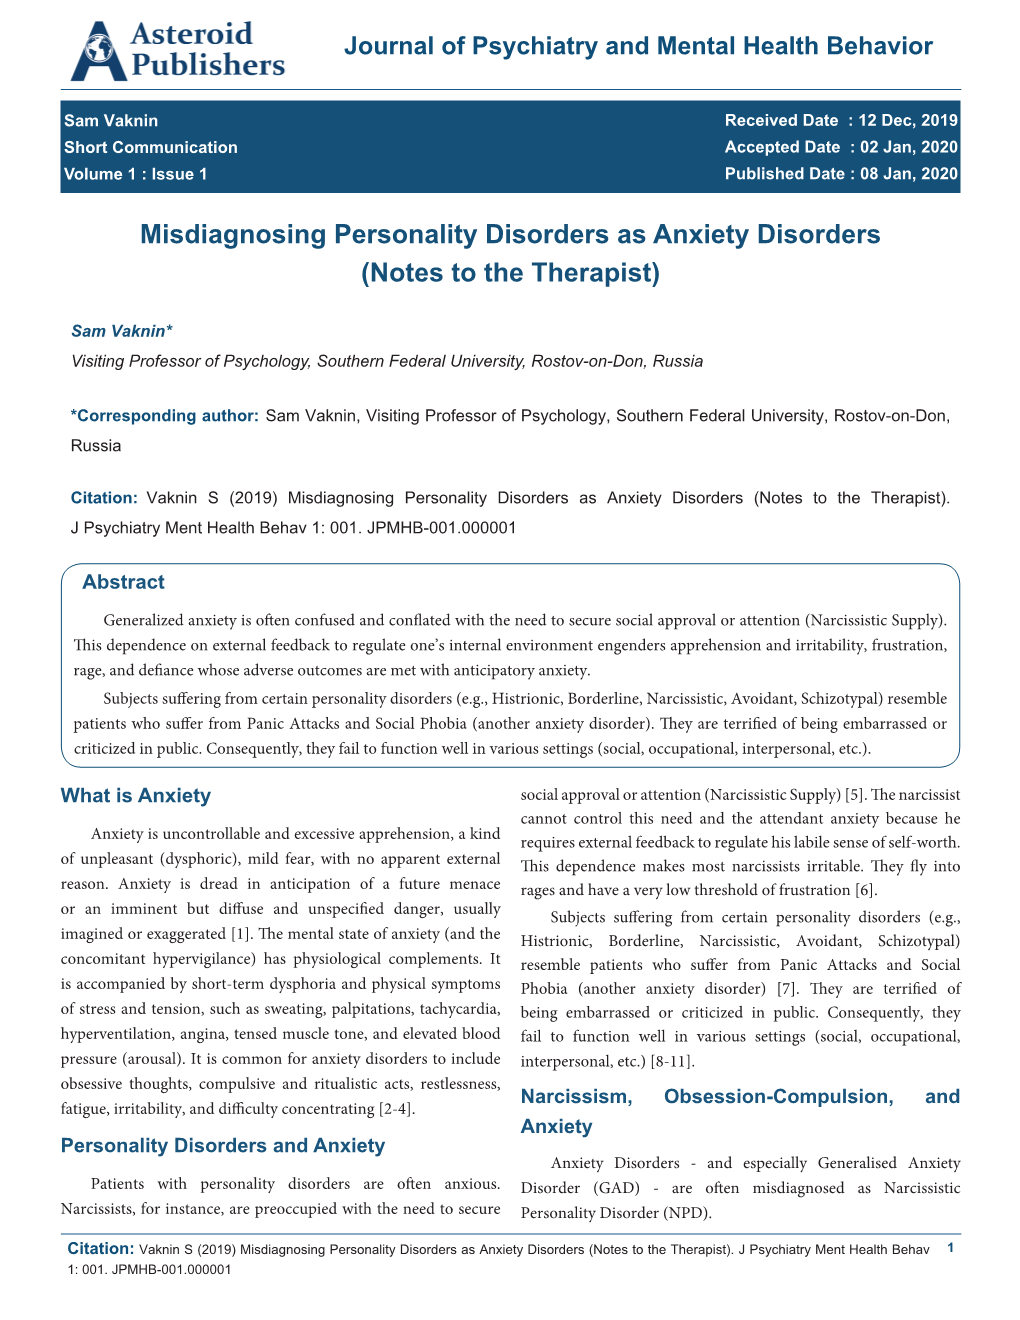 Misdiagnosing Personality Disorders As Anxiety Disorders (Notes to the Therapist)